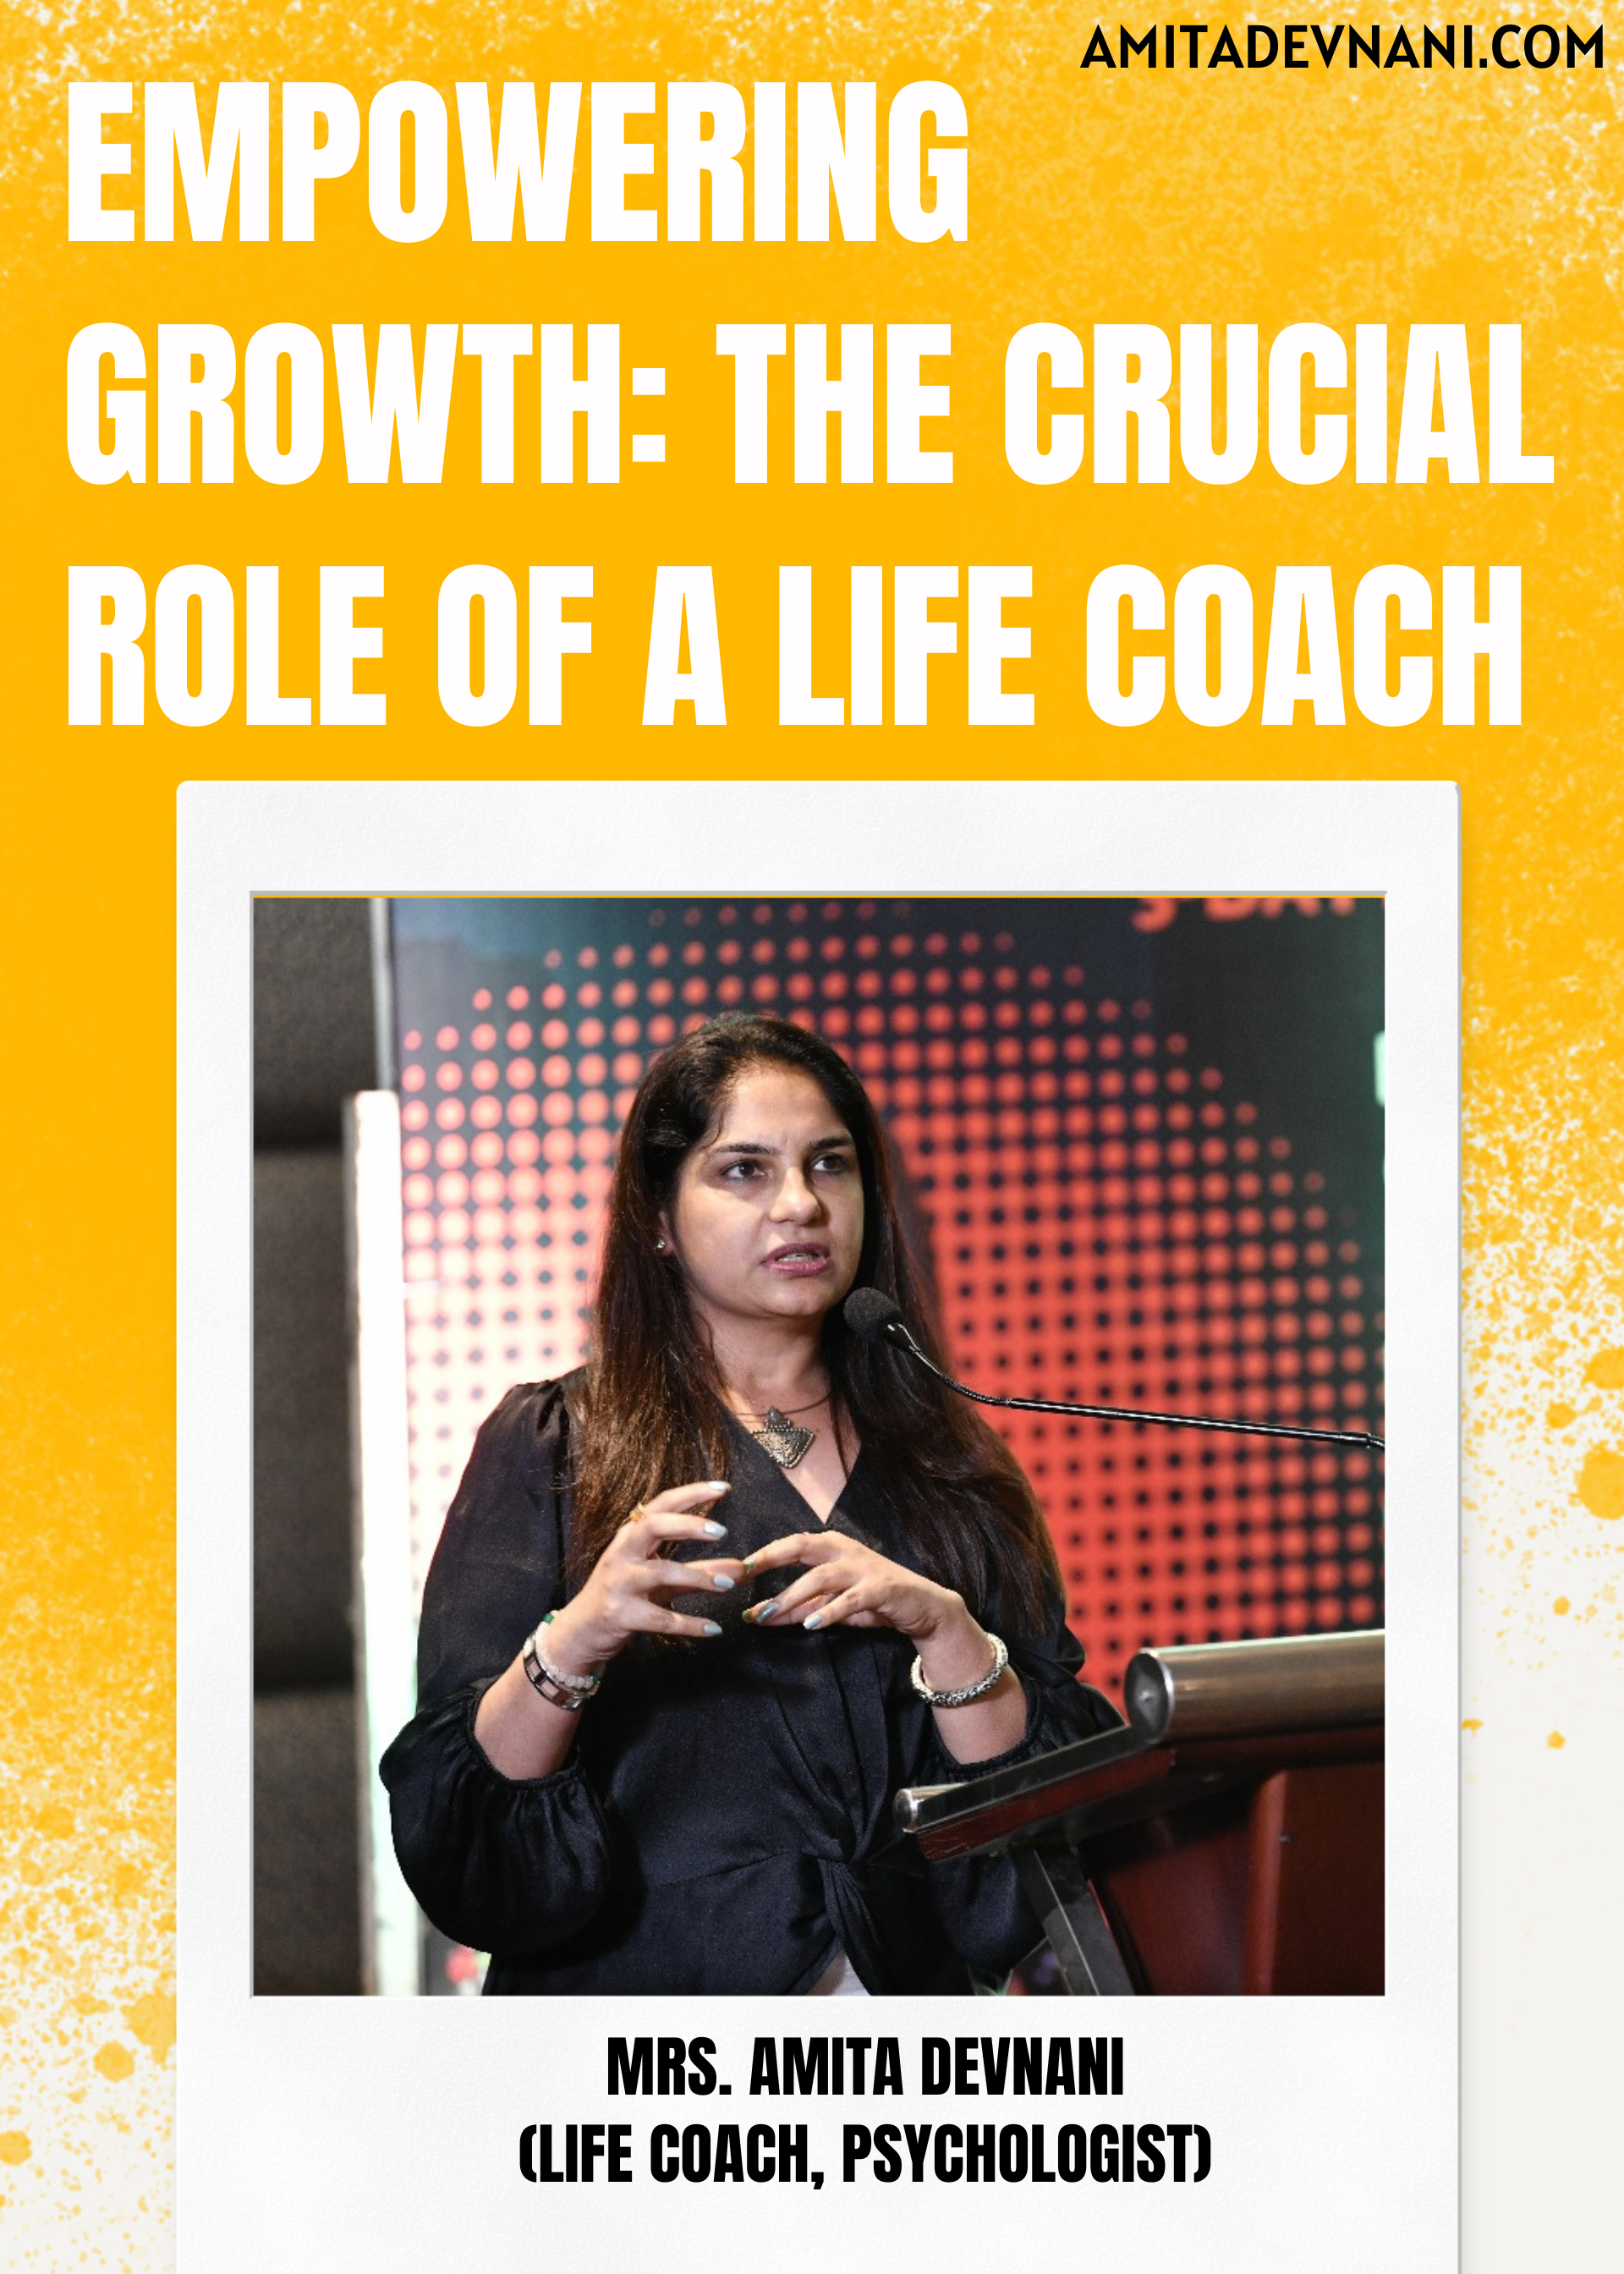 Empowering Growth- Crucial Role of a life coach